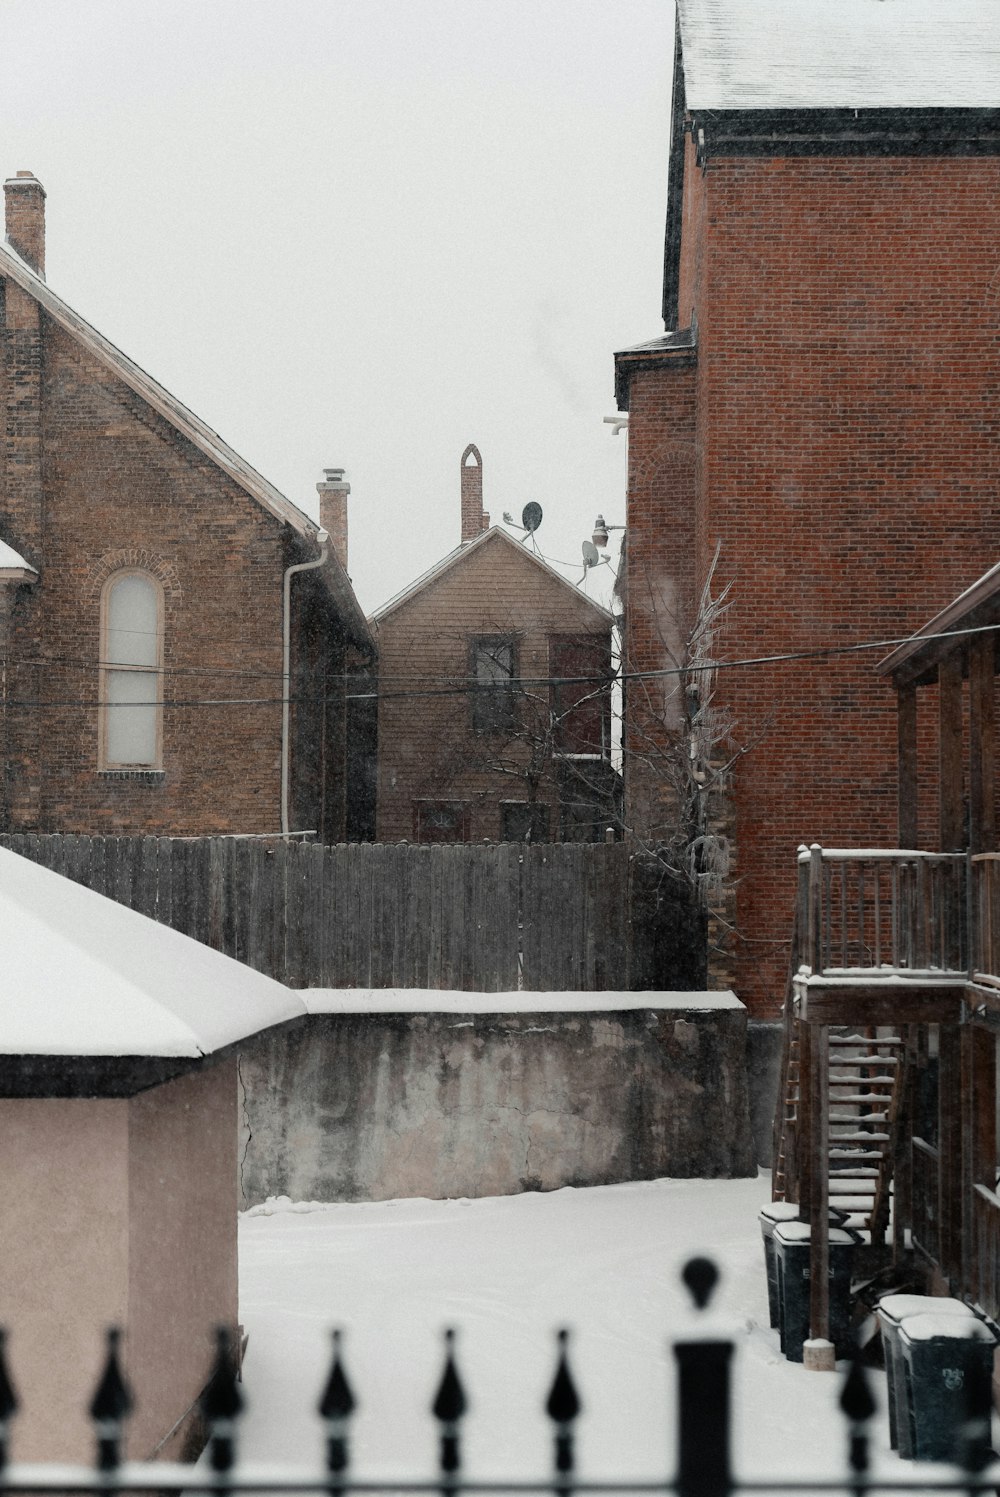 a snow covered yard with a clock tower in the background